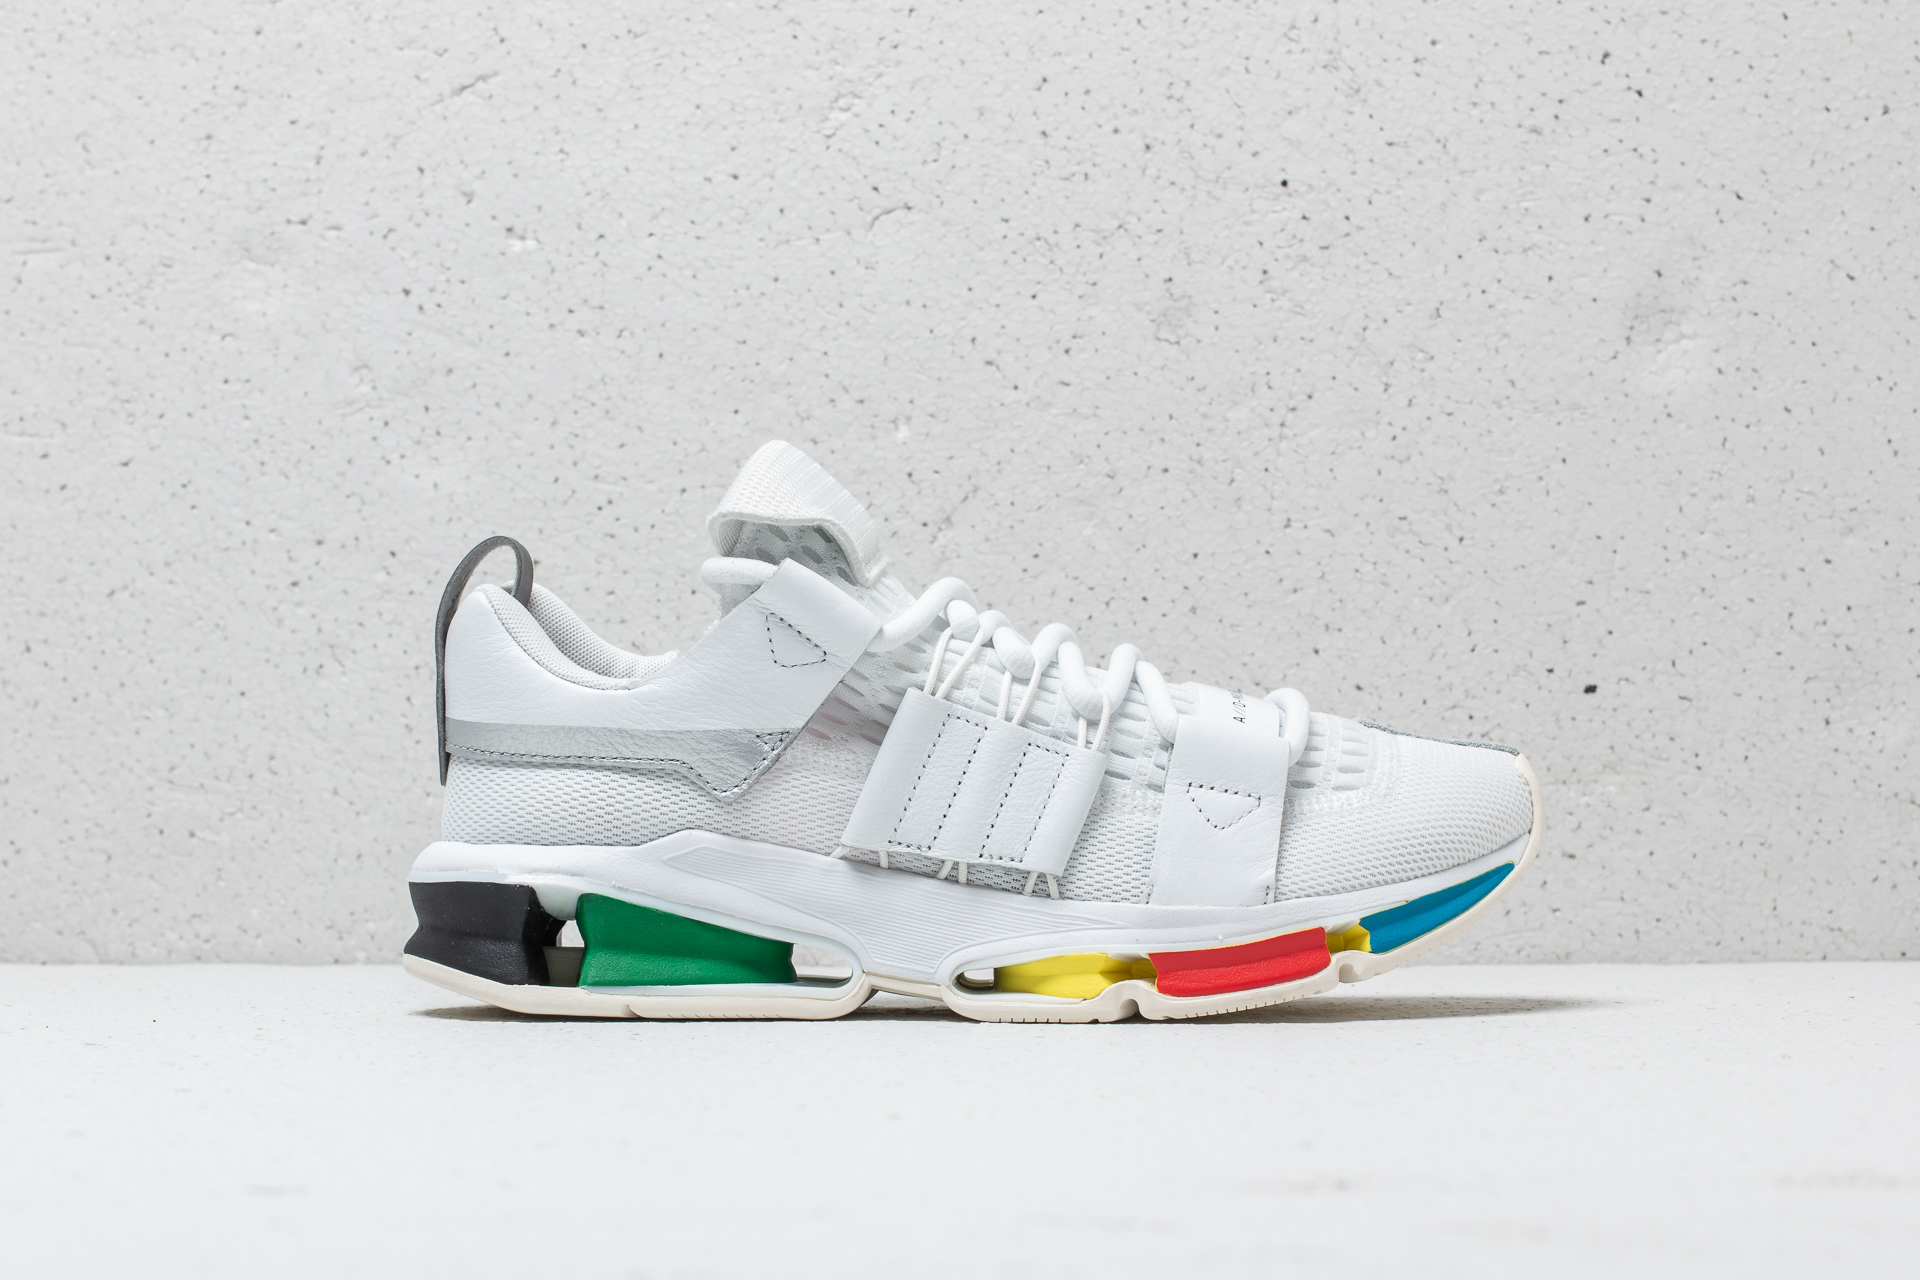 adidas x Oyster Holdings Twinstrike - BD7262 Cloud / Off White / Core Black - Footshop - Releases